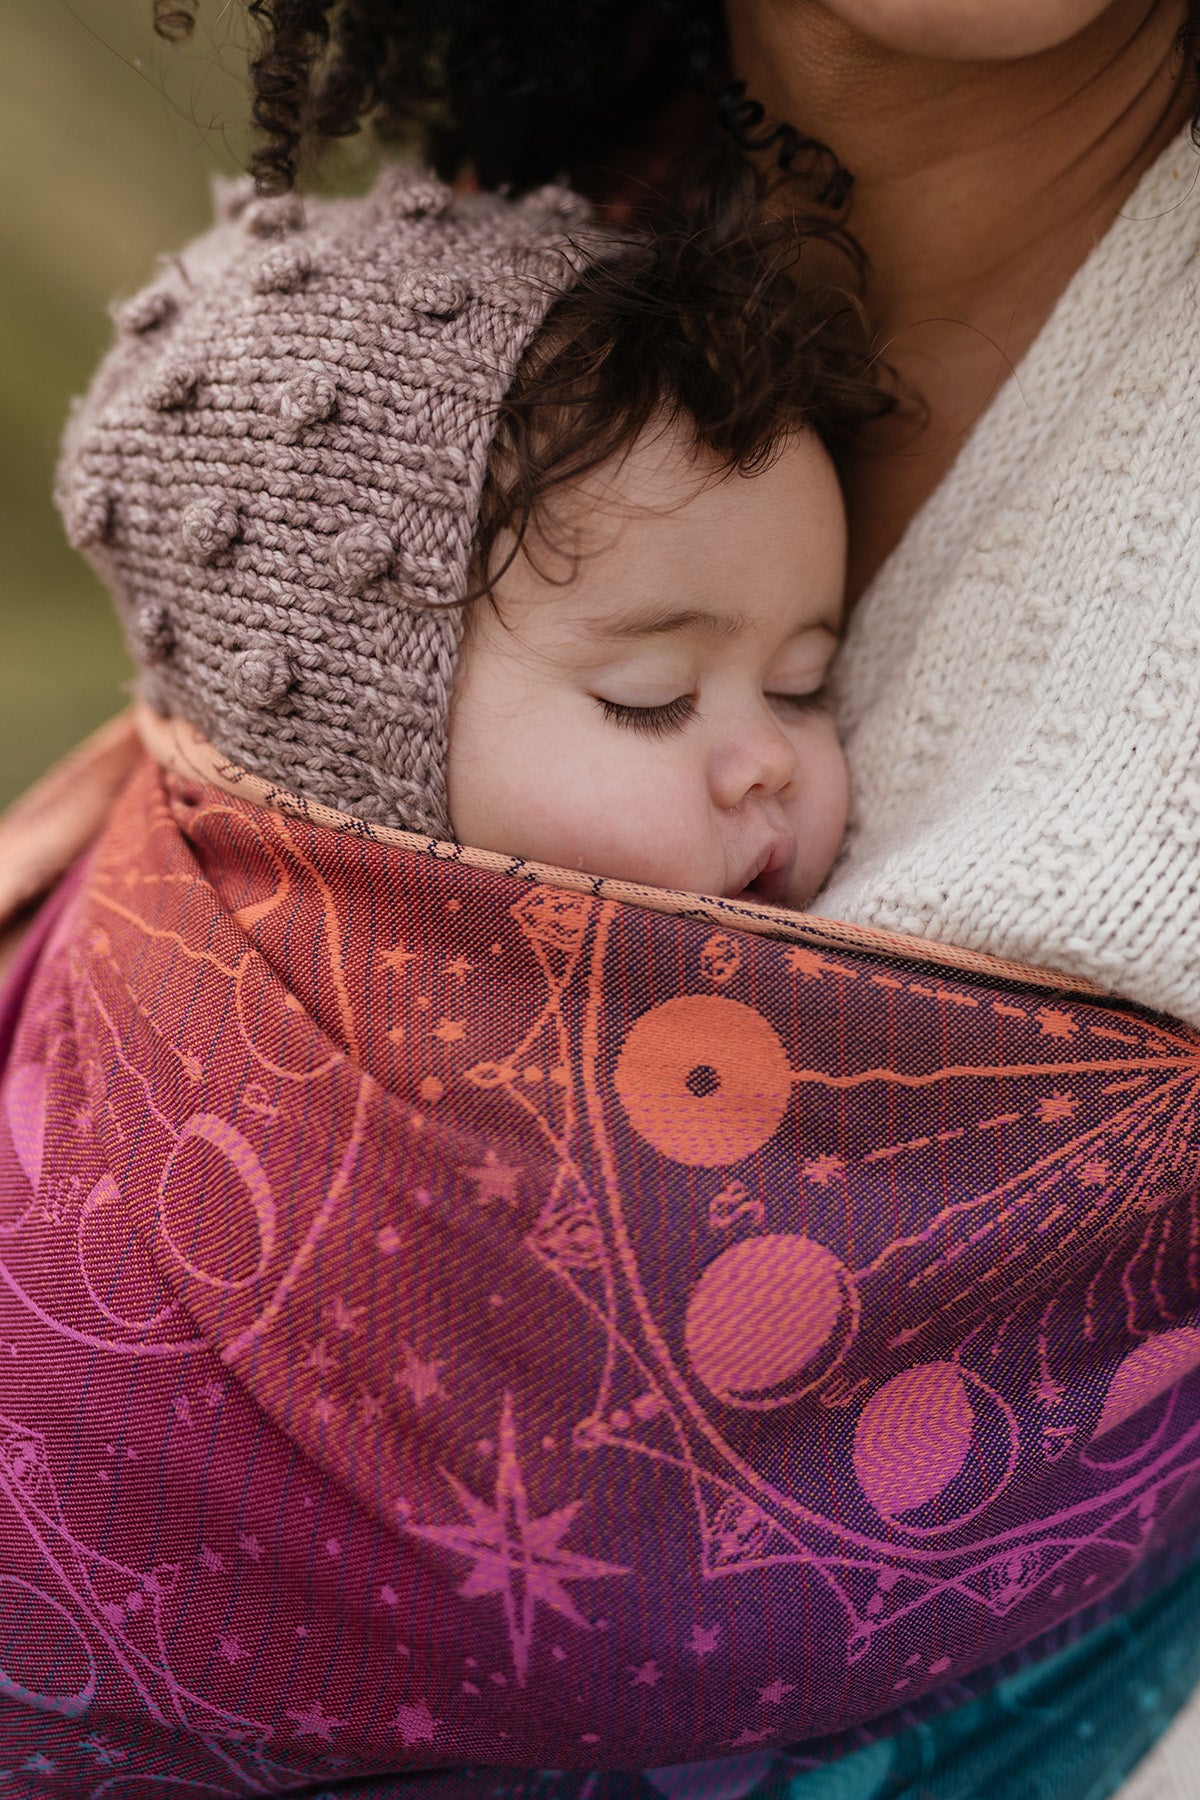 Does sleeping in a sling cause problems? Baby feeling safe and secure in sling